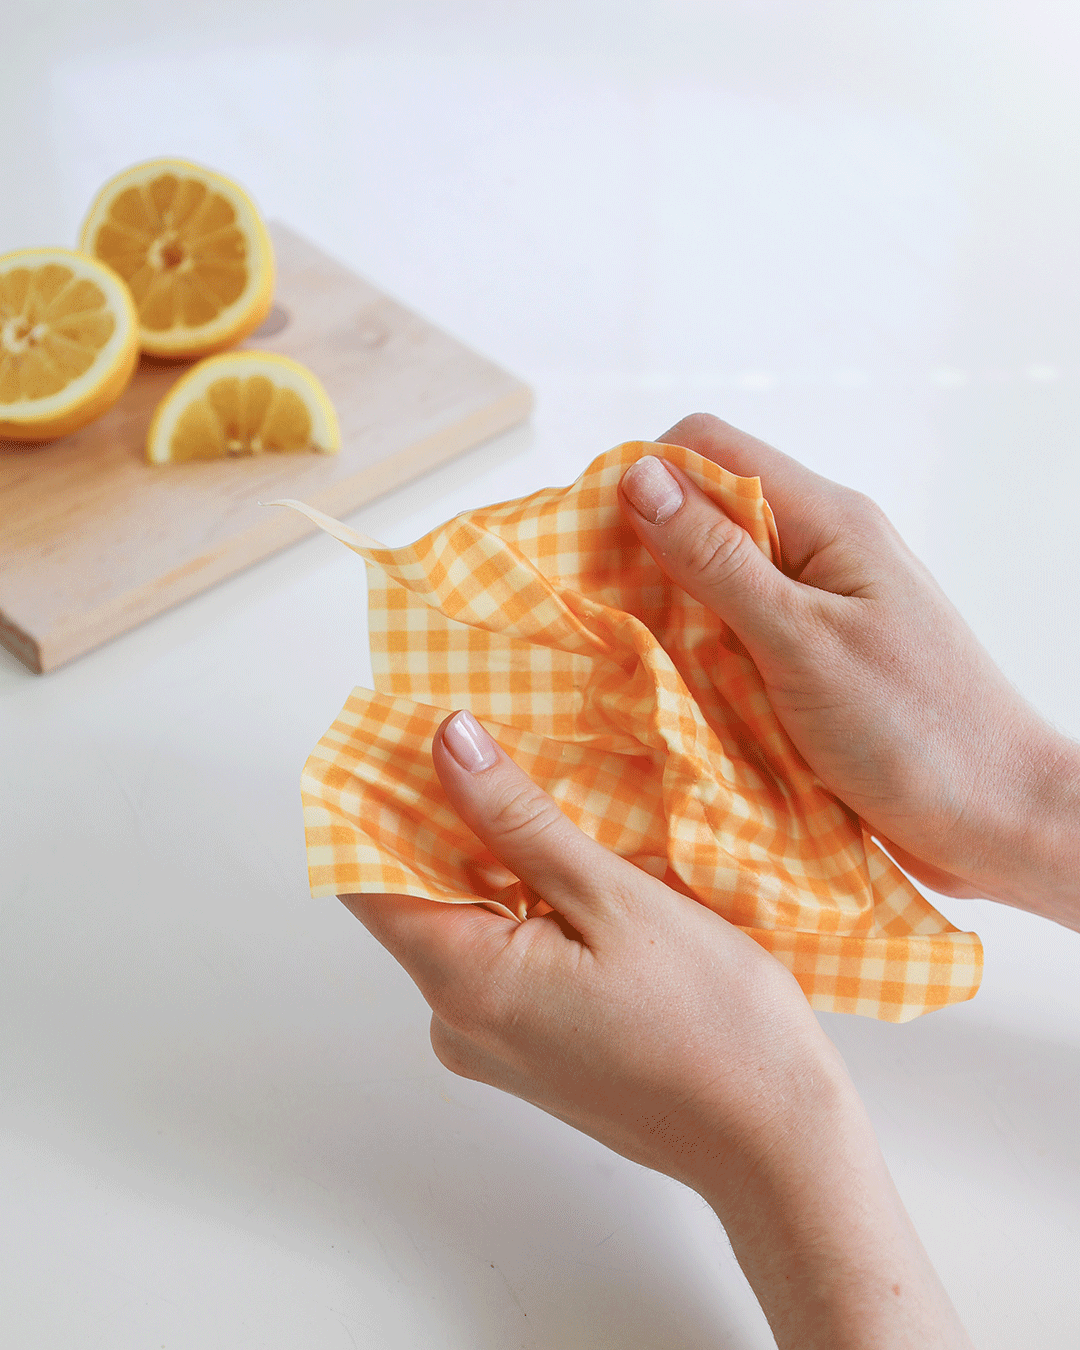 Blog Title: The Do’s and Don’ts of Beeswax Wraps: Your Guide to Eco-Friendly Food Storage